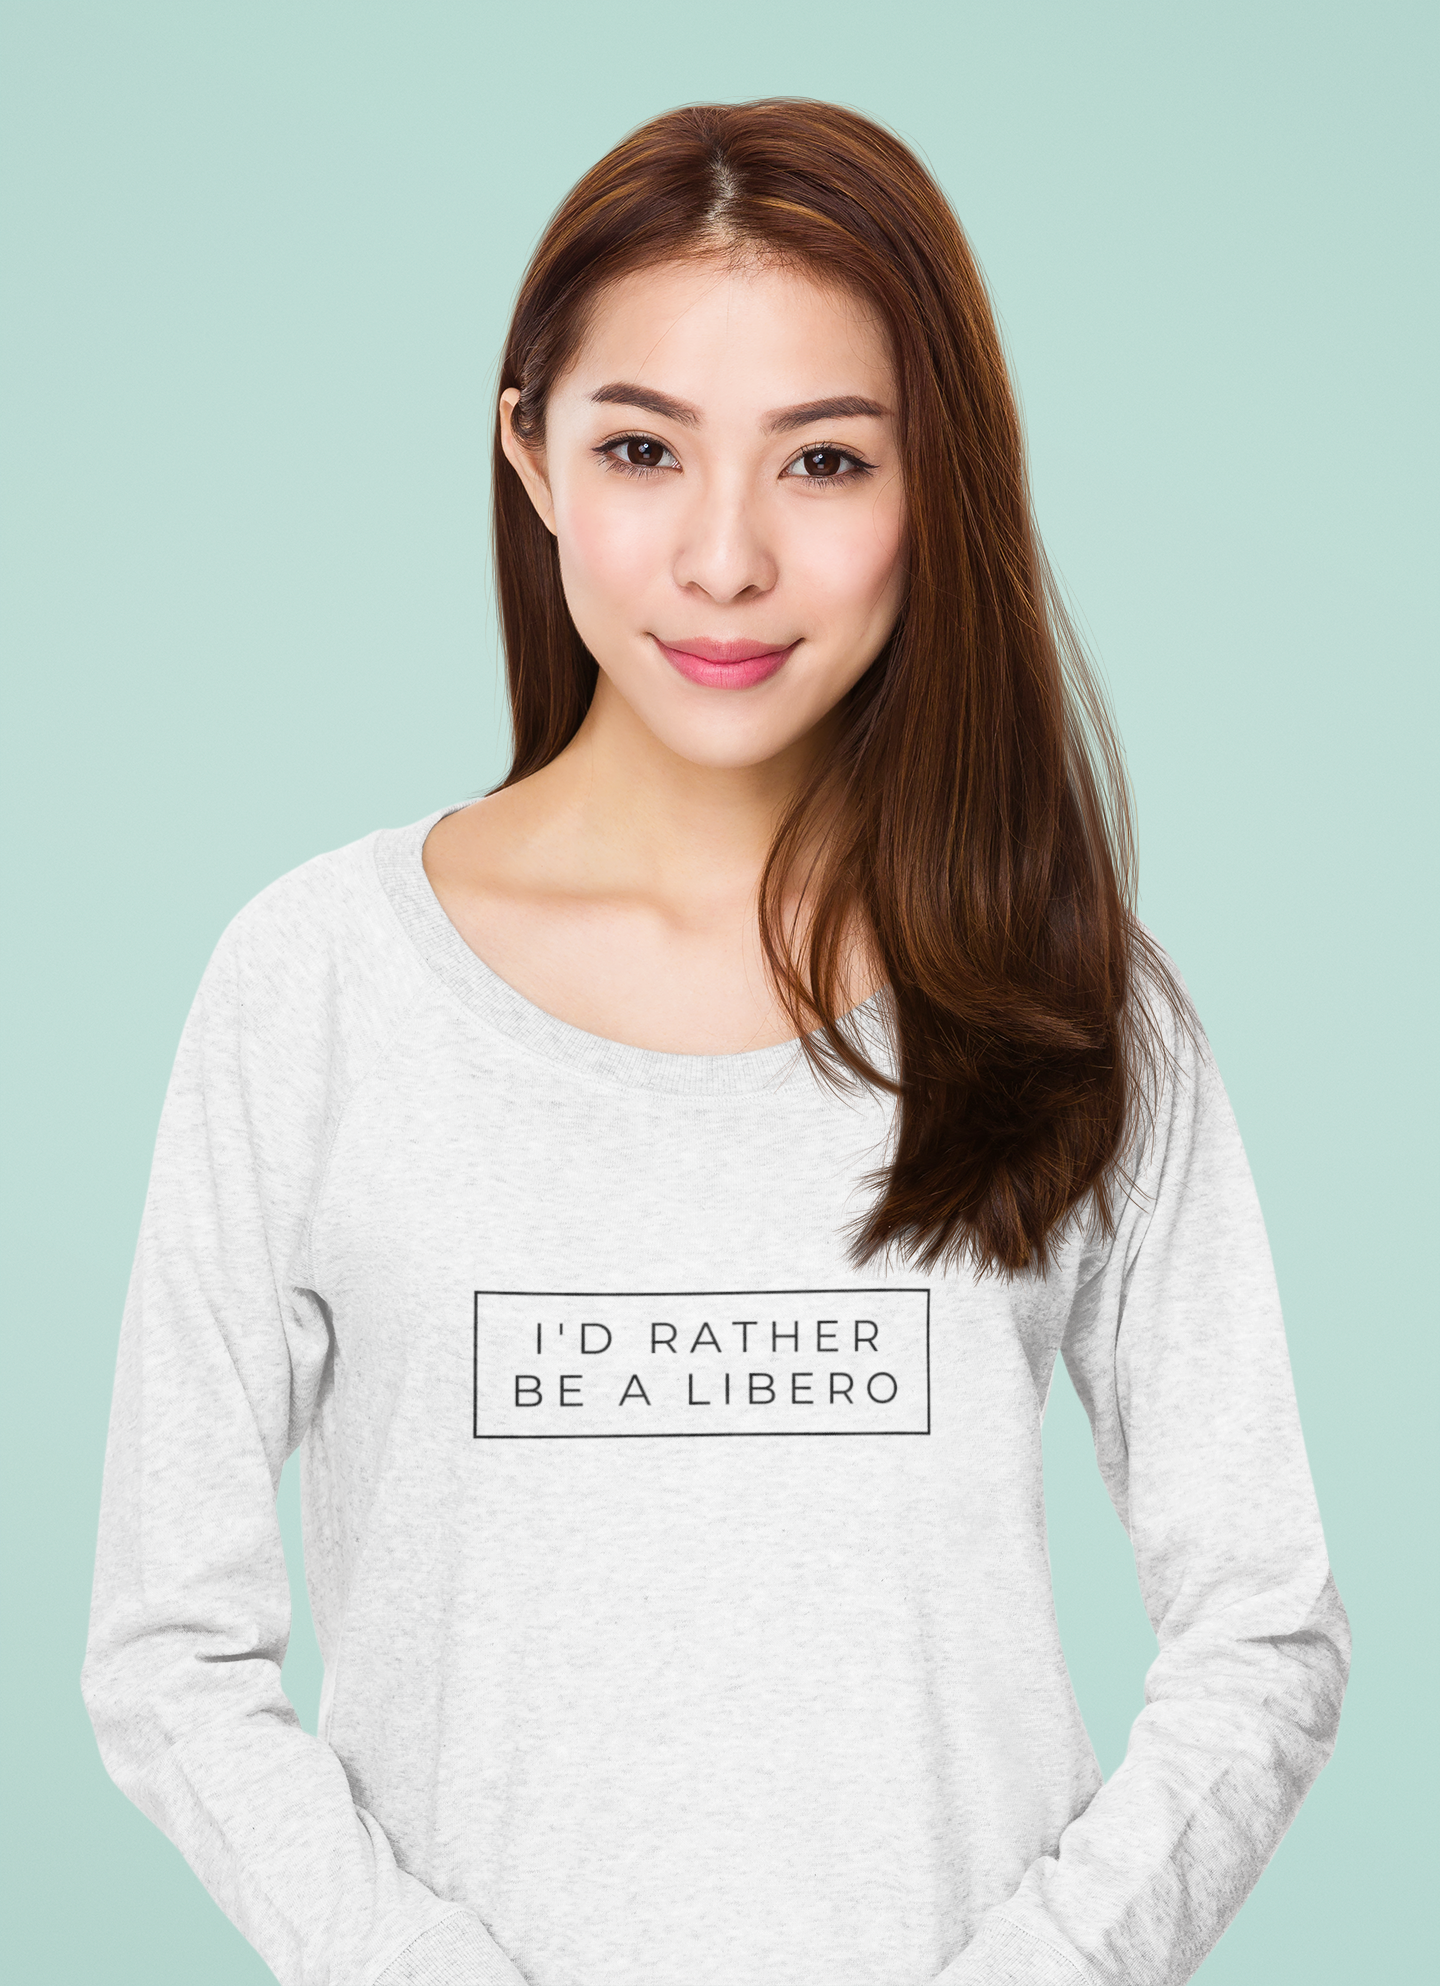 More Fun Shirts That Make Great Gifts For
Volleyball Players "I'd Rather Be A Libero"